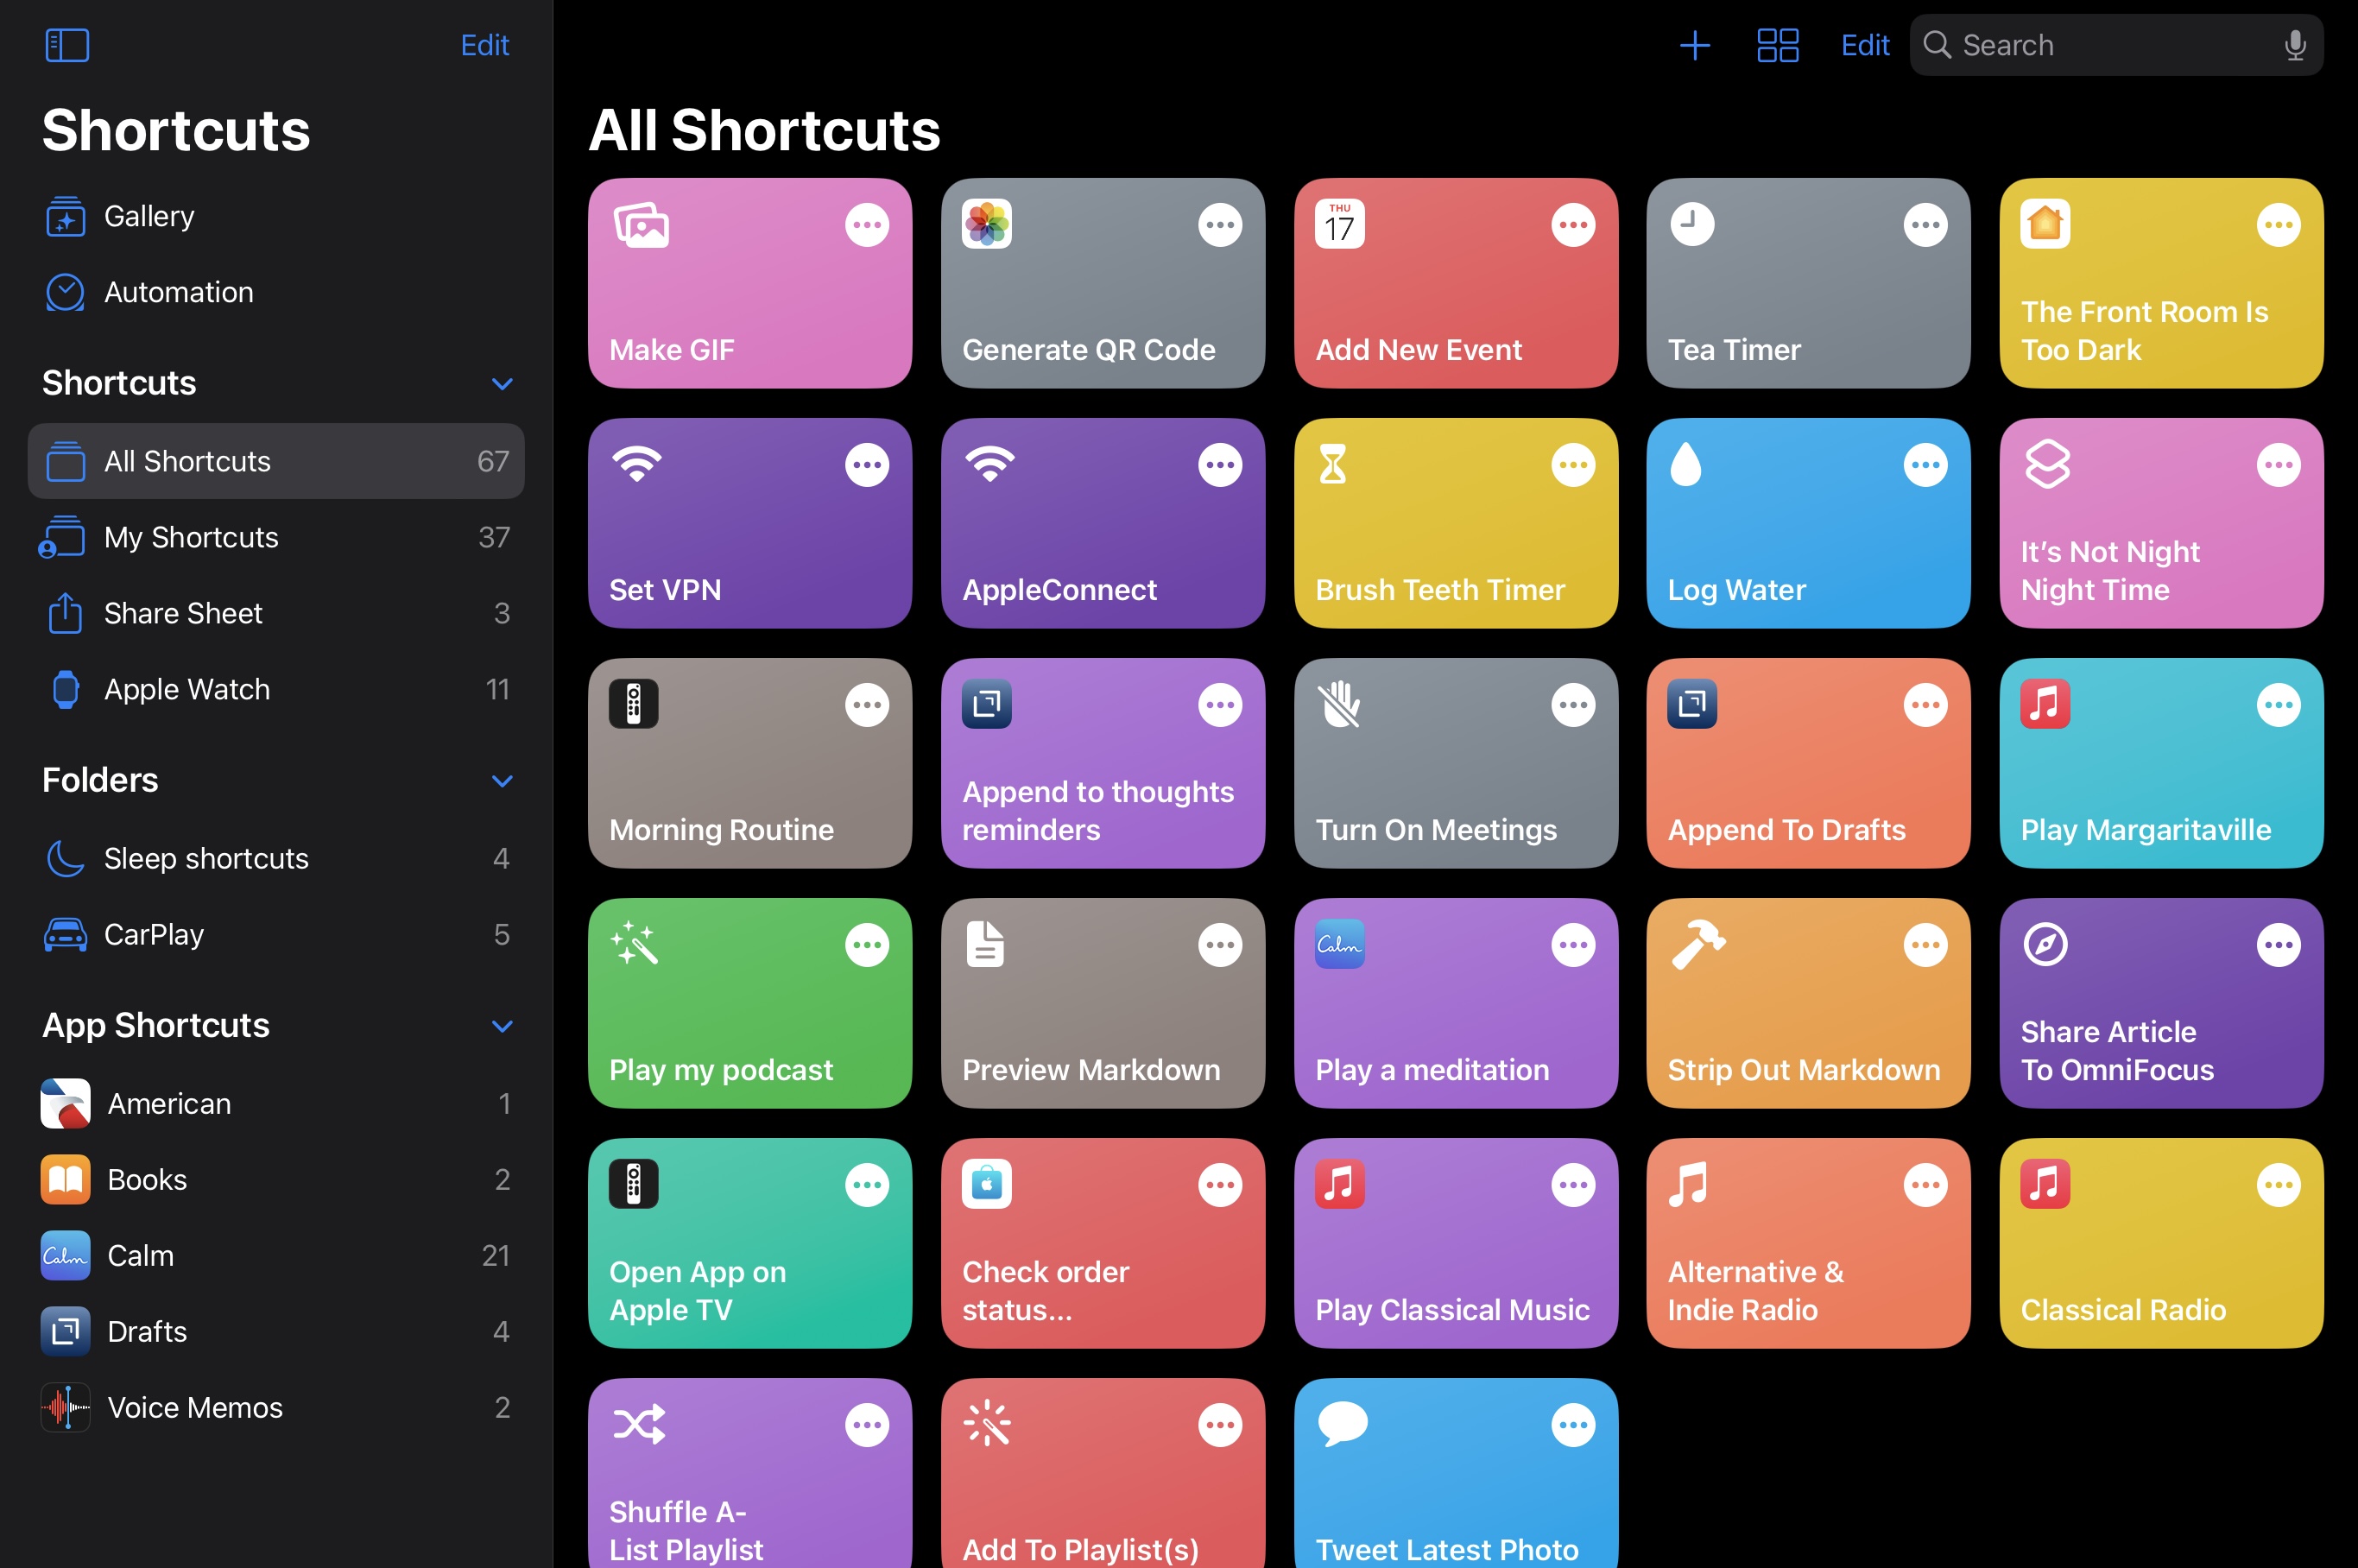 The main page of the iPad shortcuts app. "All Shortcuts" is selected from the menu on the left.  28 shortcuts are visible.